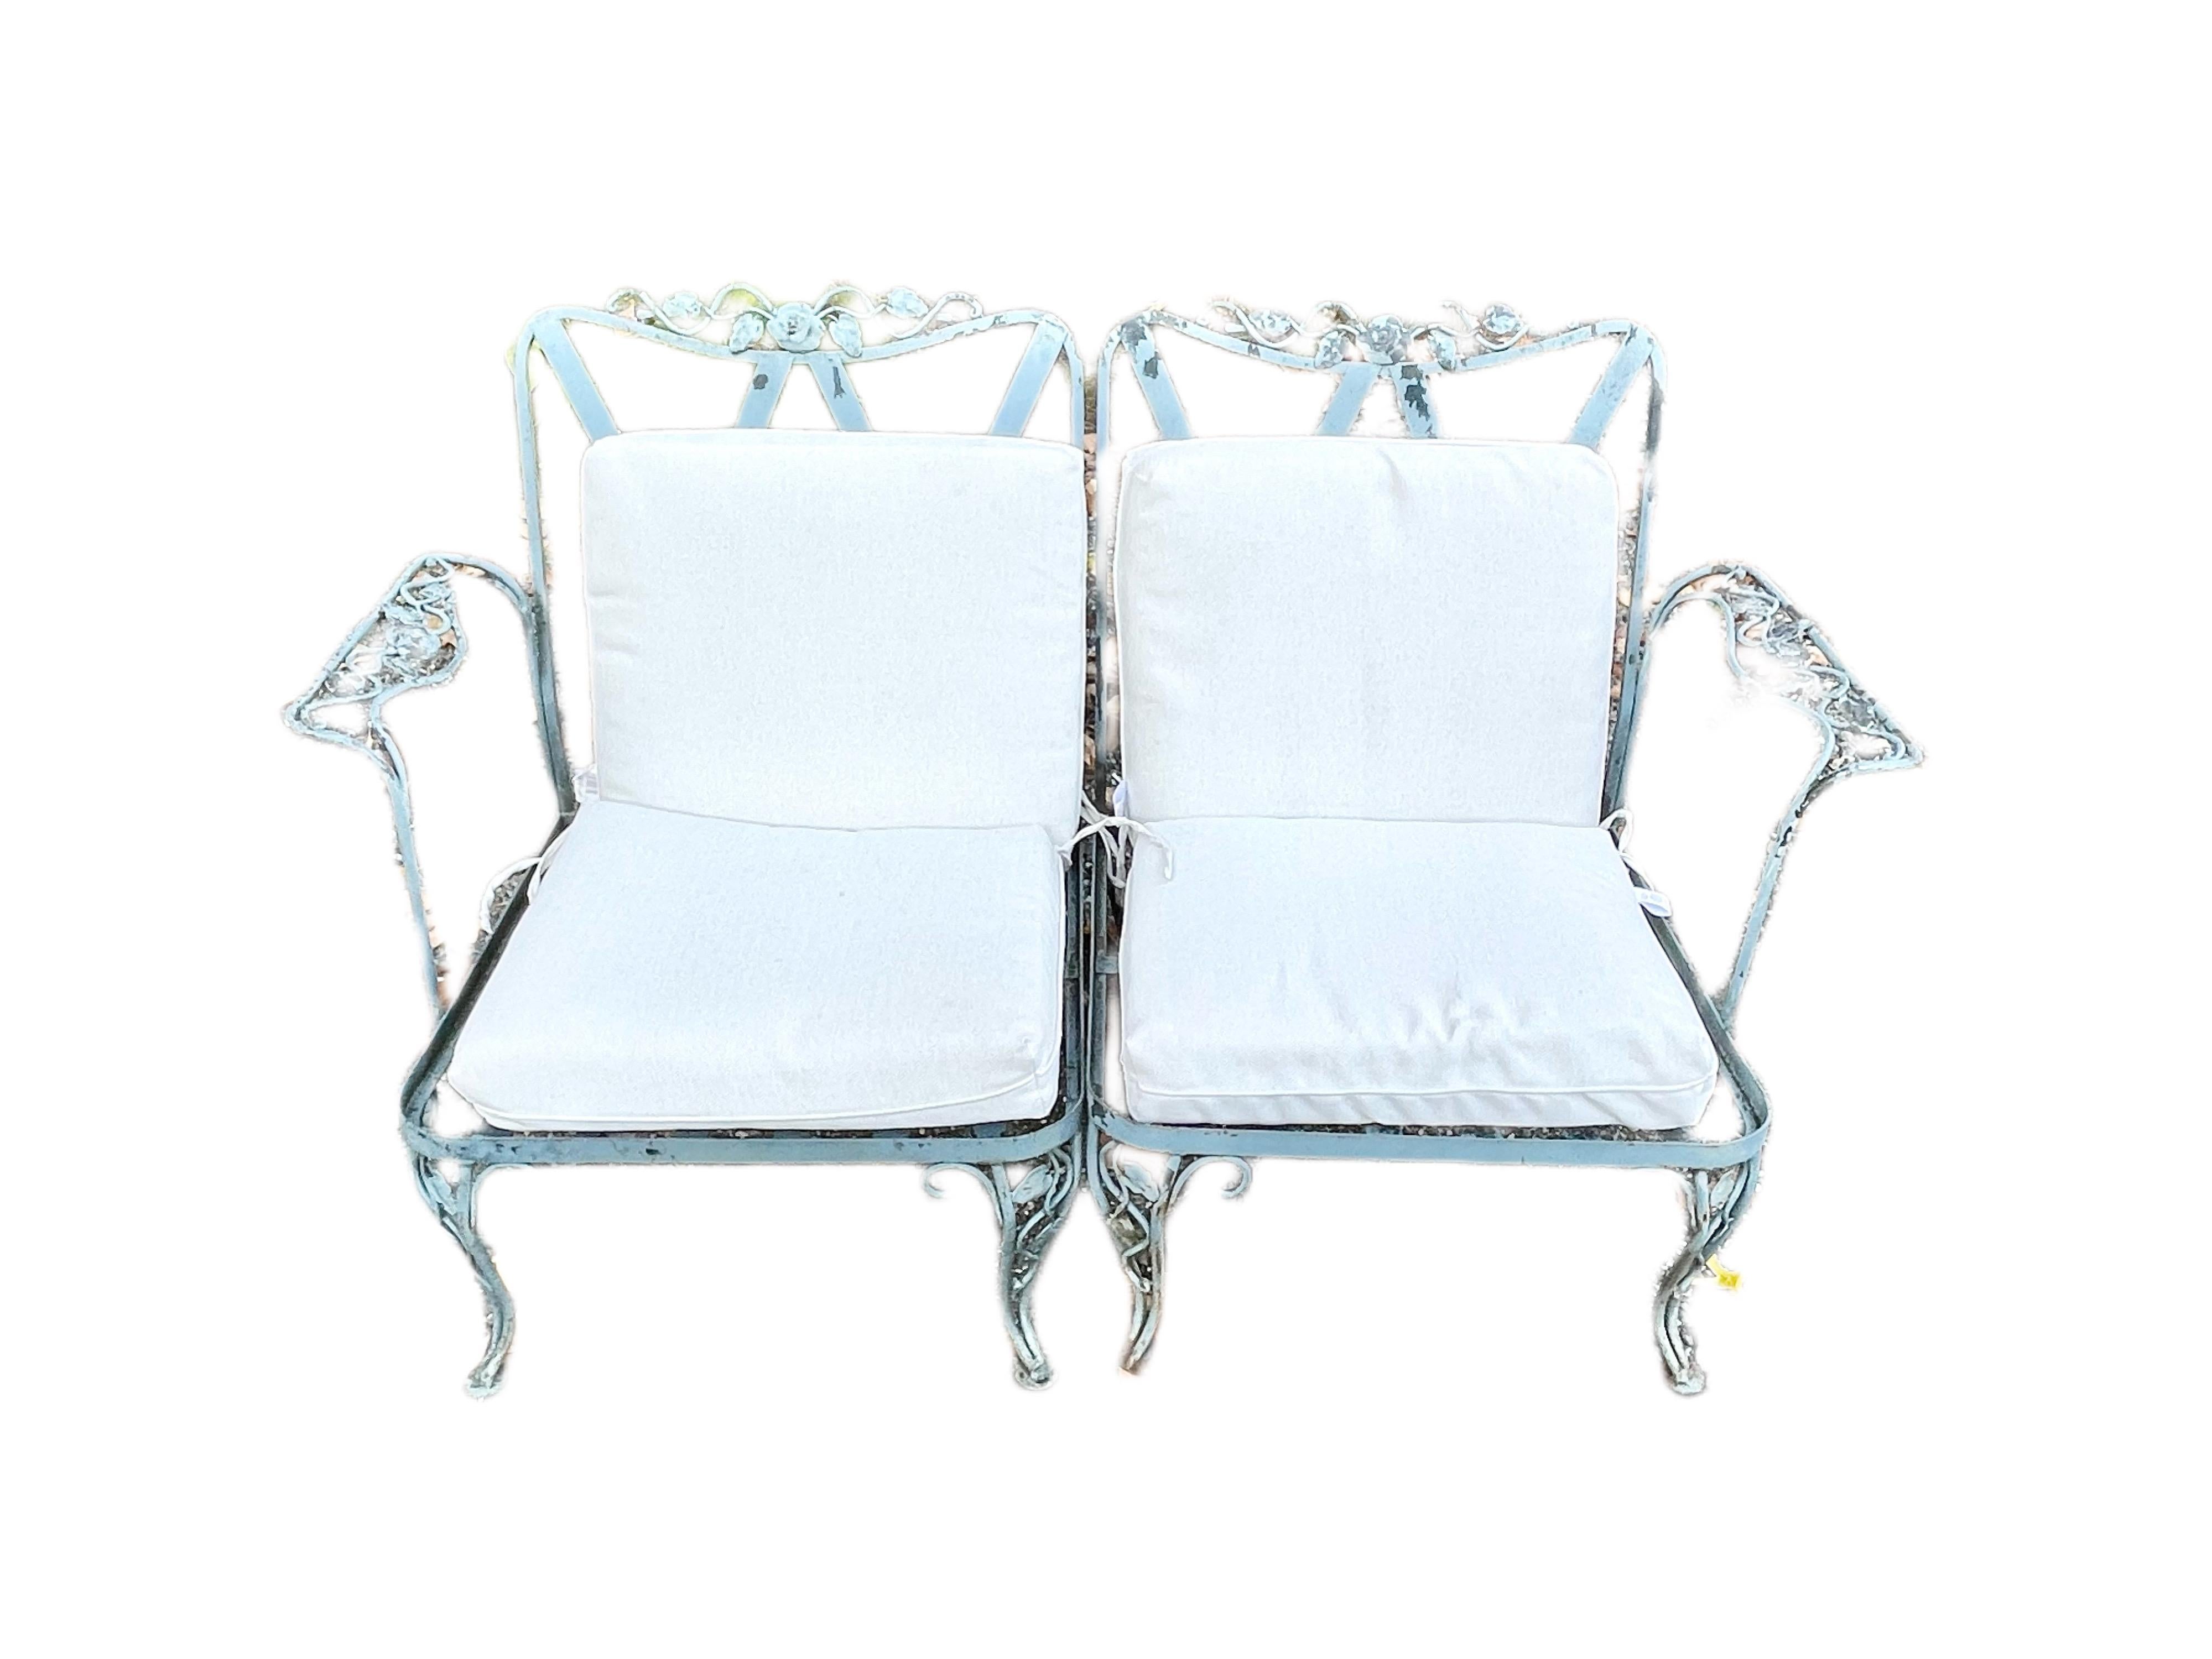 Romantic Vintage Wrought Iron Woodard Chantilly Rose Tete-a-tete Style Loveseat For Sale